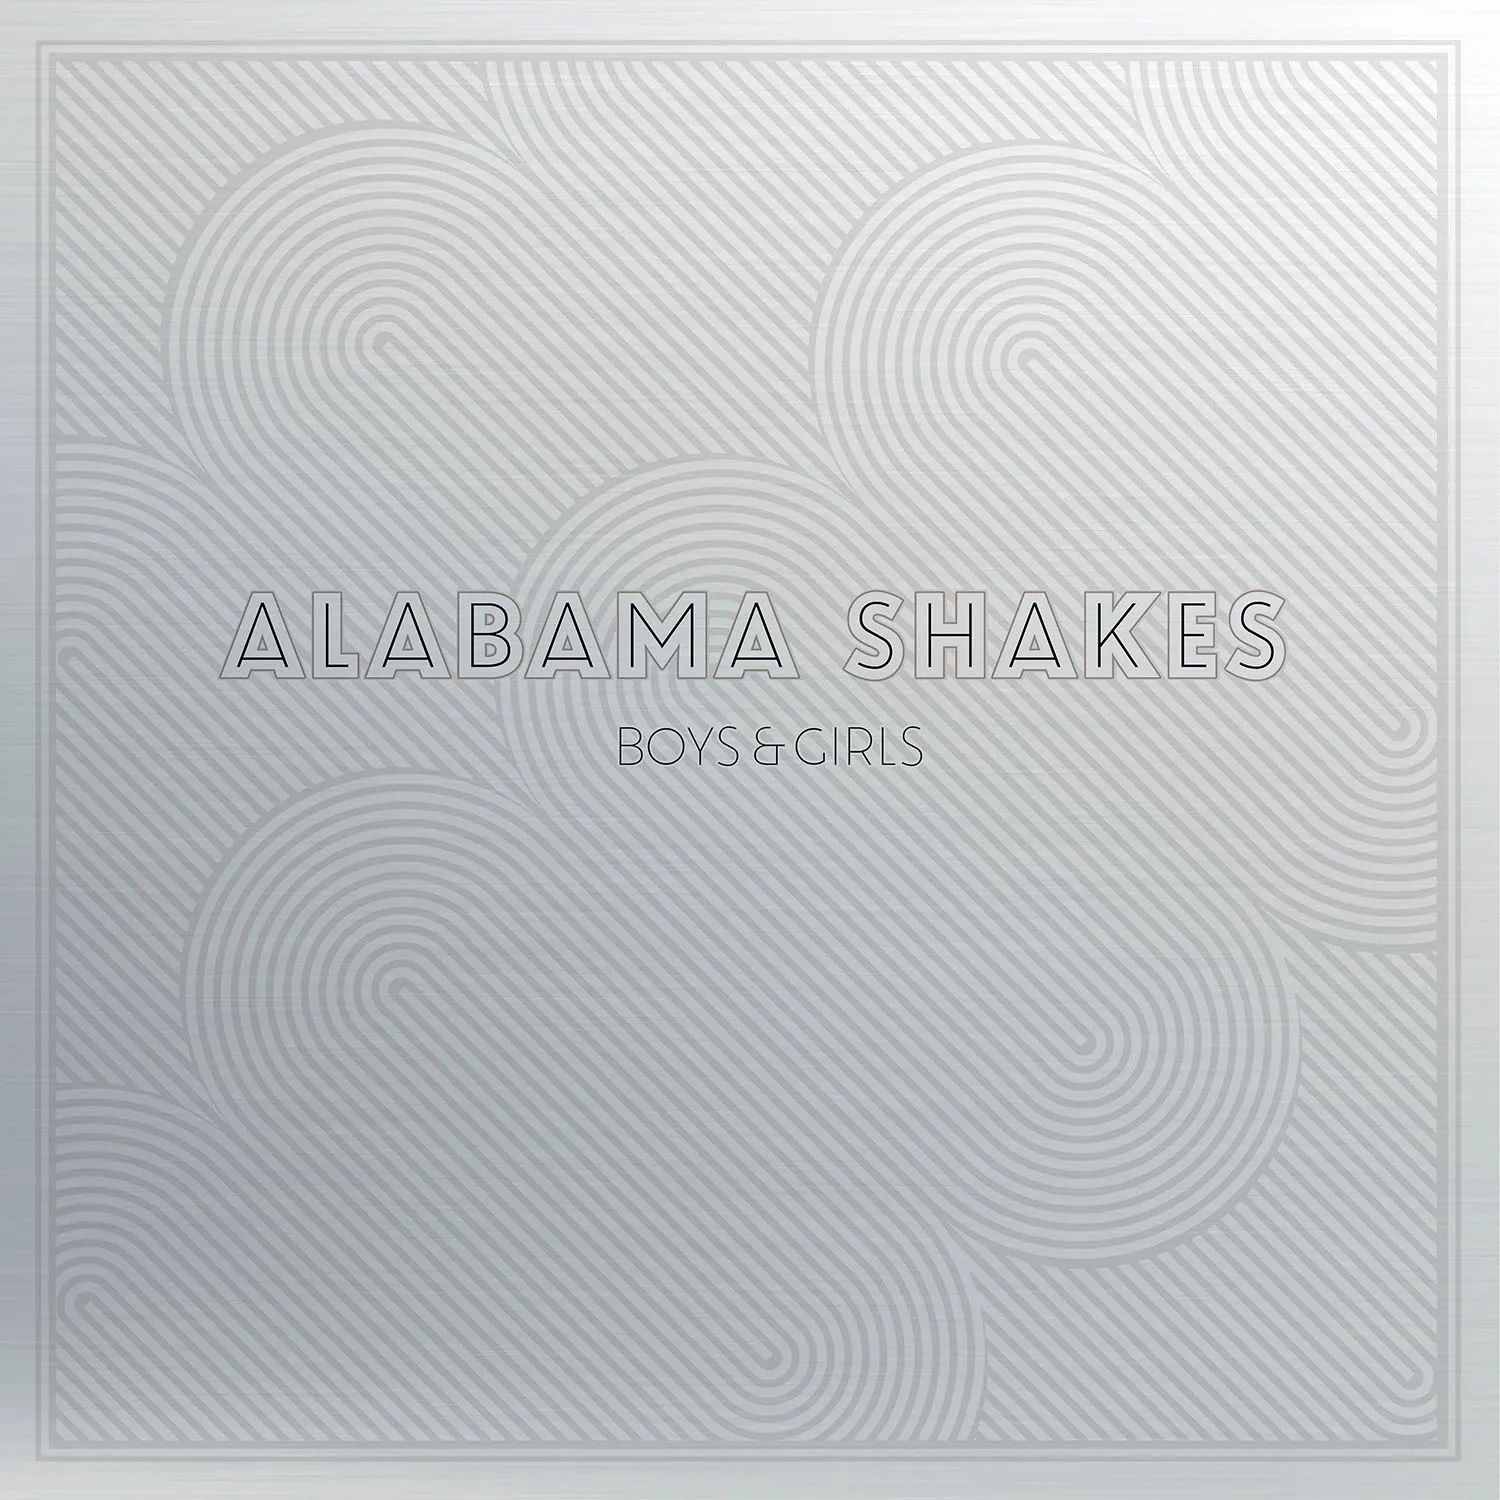 <strong>Alabama Shakes - Boys and Girls (10th Anniversary Deluxe Edition)</strong> (Vinyl LP - clear)